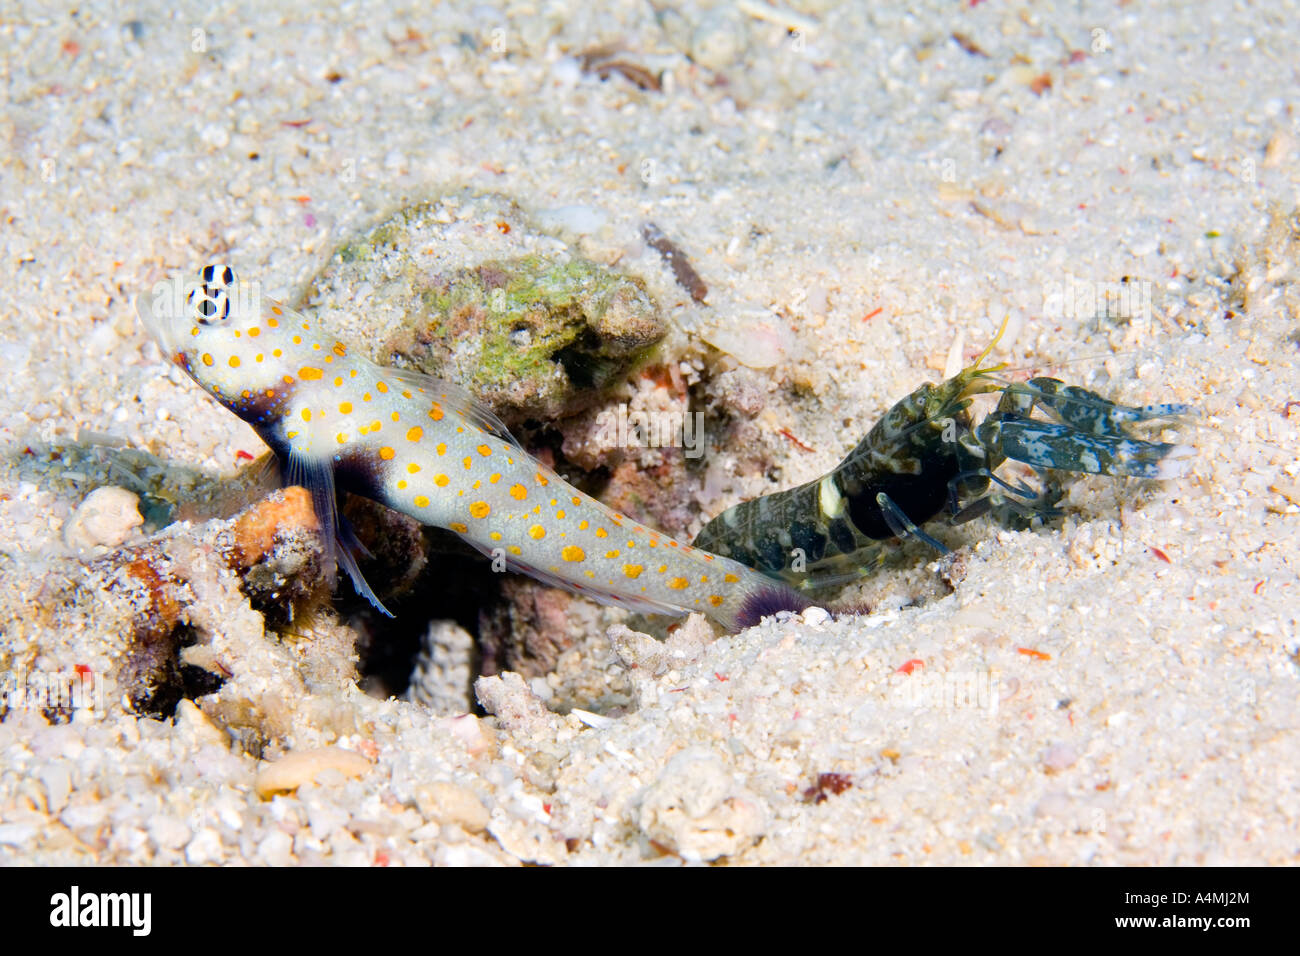 Spotted shrimp goby also known as Black Chest shrimp goby, Amblyeleotris guttata in symbiotic relationship with undescribed snapping shrimp, Stock Photo